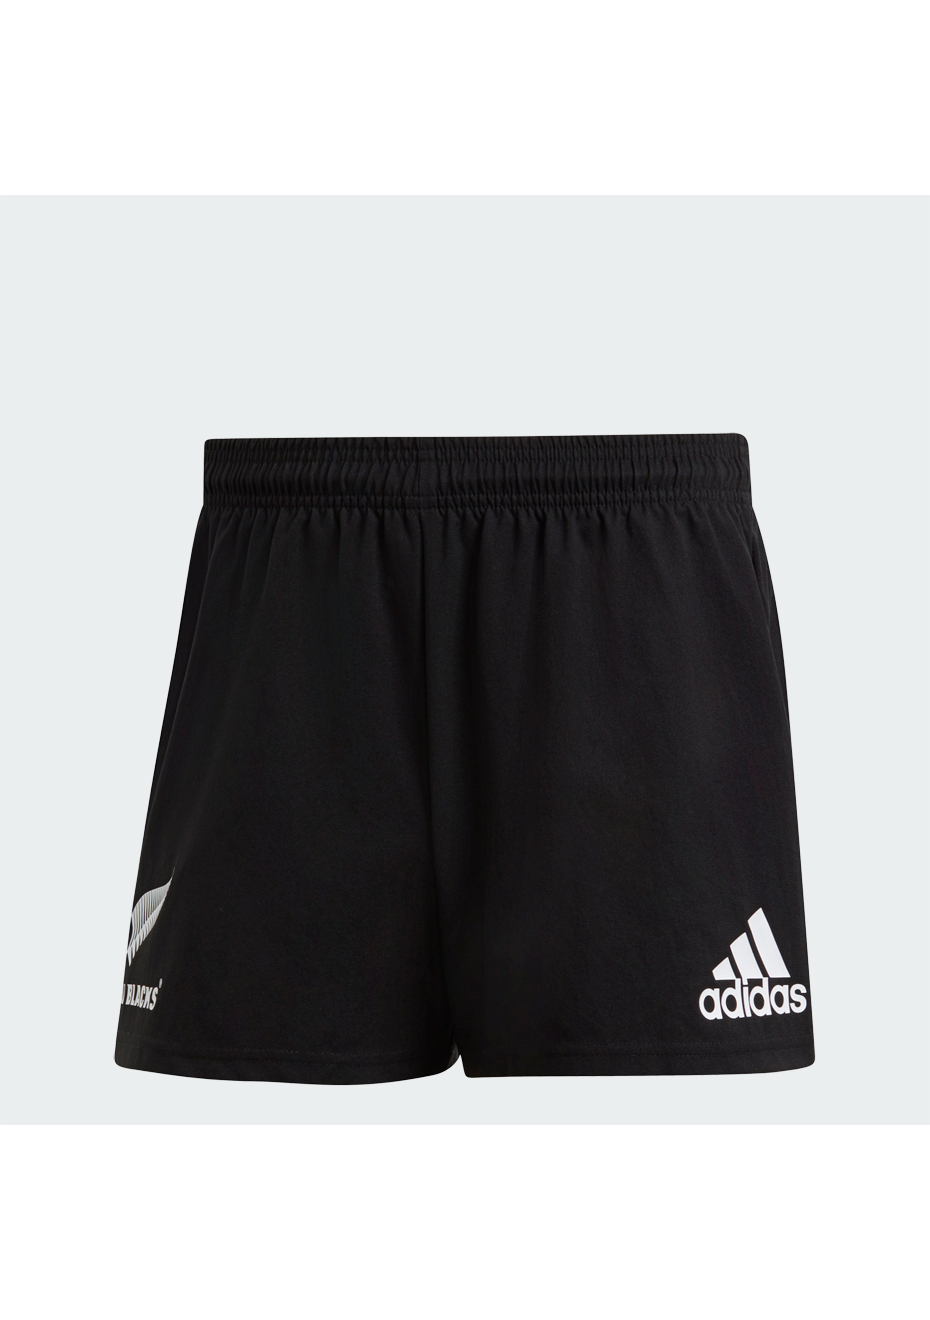 all blacks supporters shorts